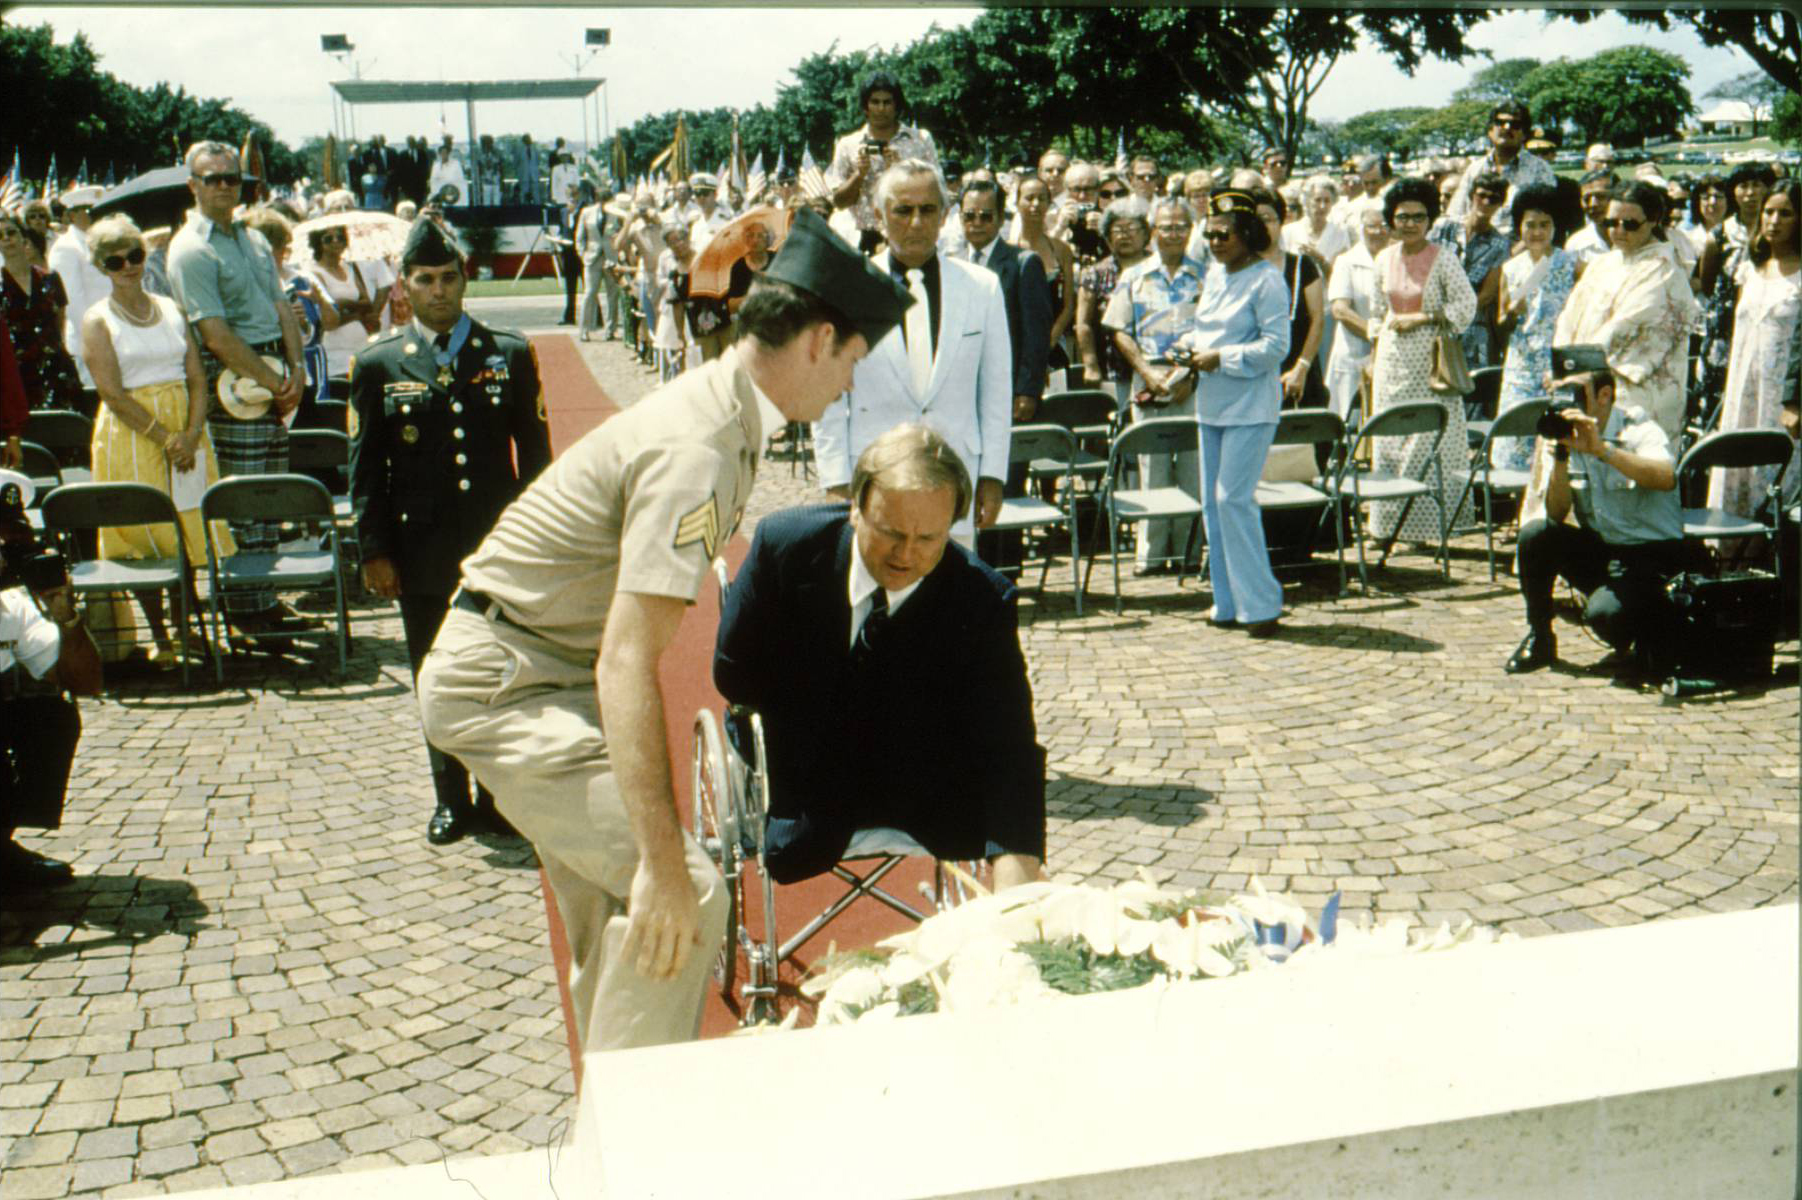 Max Cleland, a Vietnam veteran, and head of the Department of Veterans Affairs at the time, laid a wreath as part of the Memorial Day 1980 ceremony at the Honolulu Memorial. Cleland would later serve as the Secretary of ABMC (2009-2017).